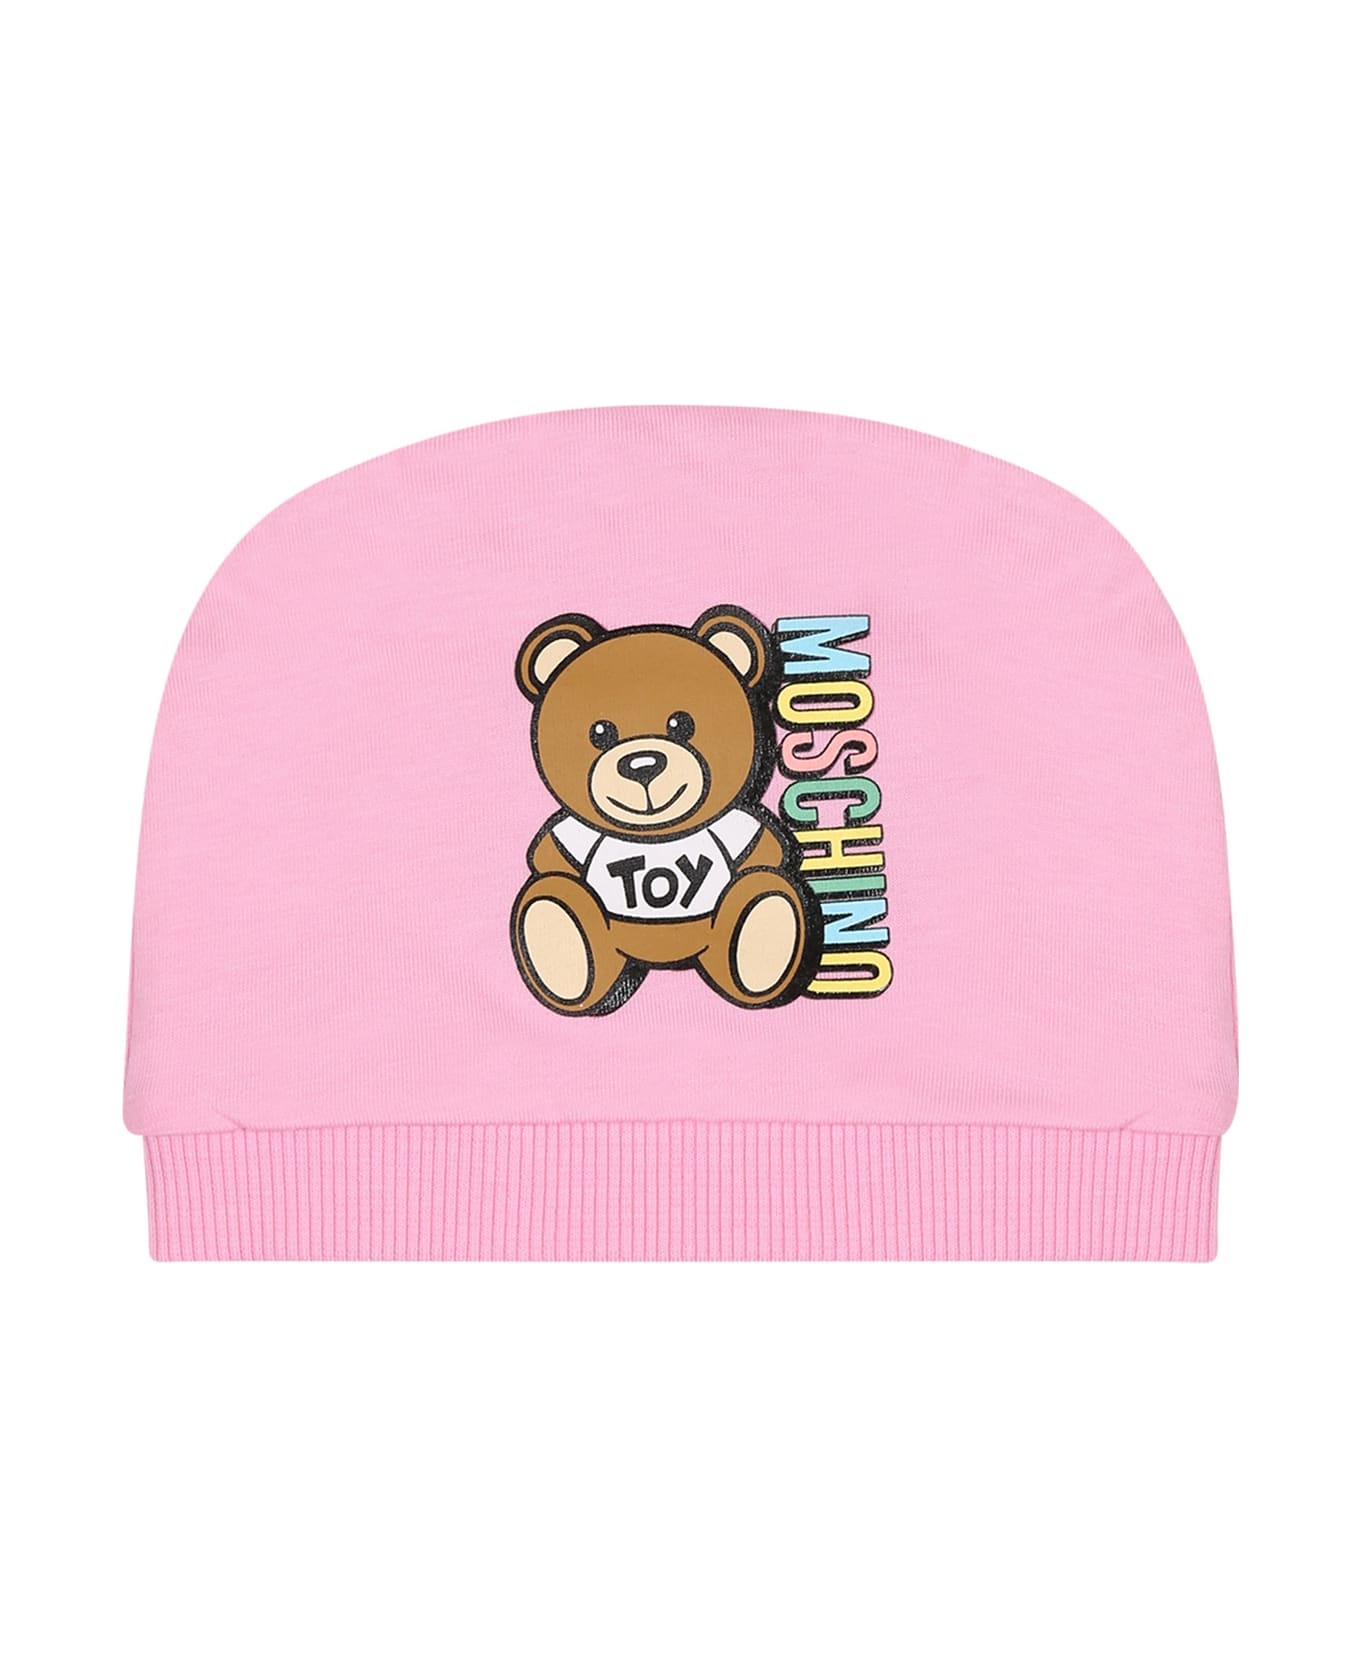 Moschino Pink Set For Baby Girl With Teddy Bear And Logo - Pink ボディスーツ＆セットアップ